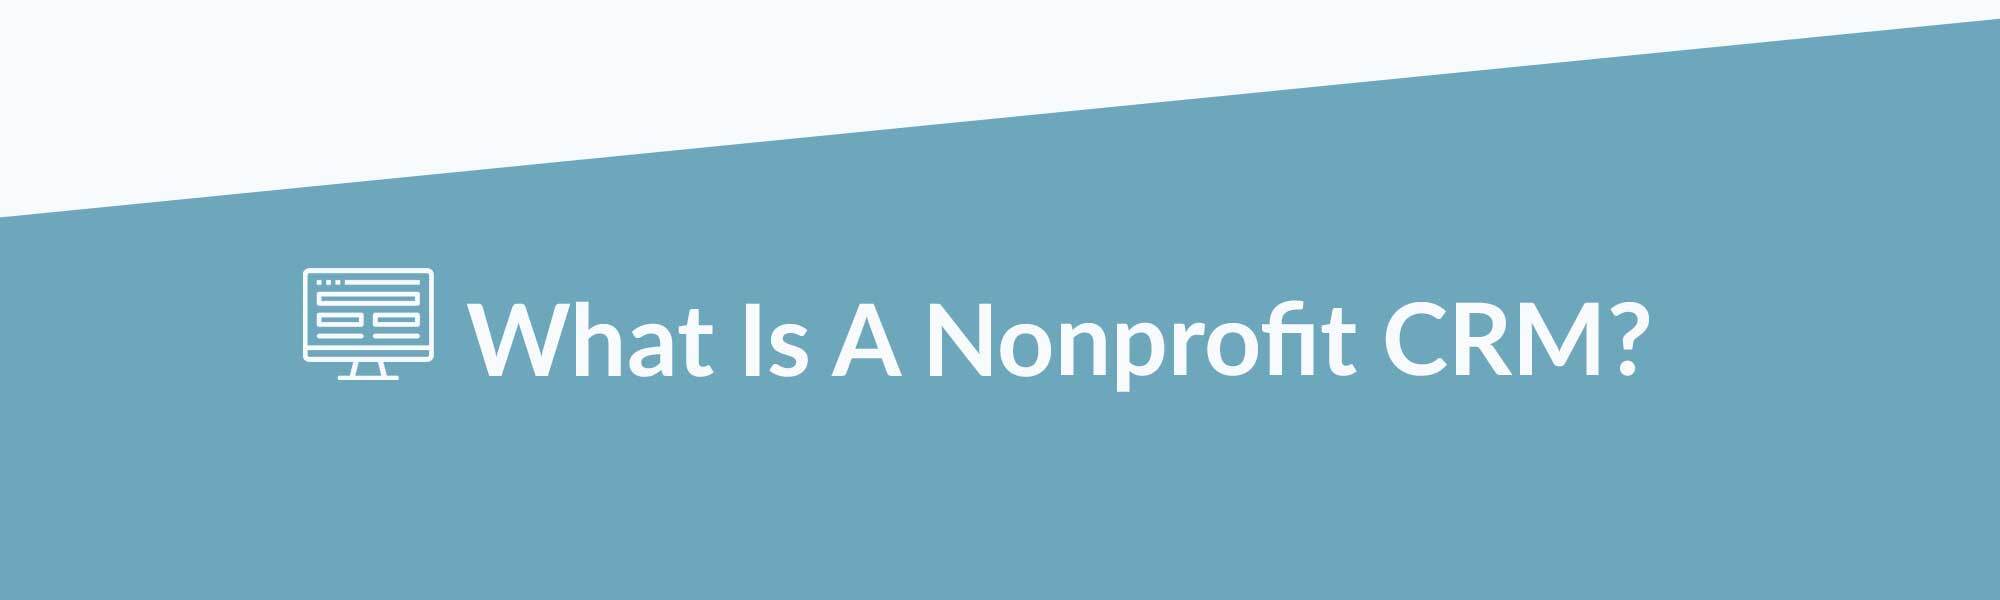 header image for what is a nonprofit crm